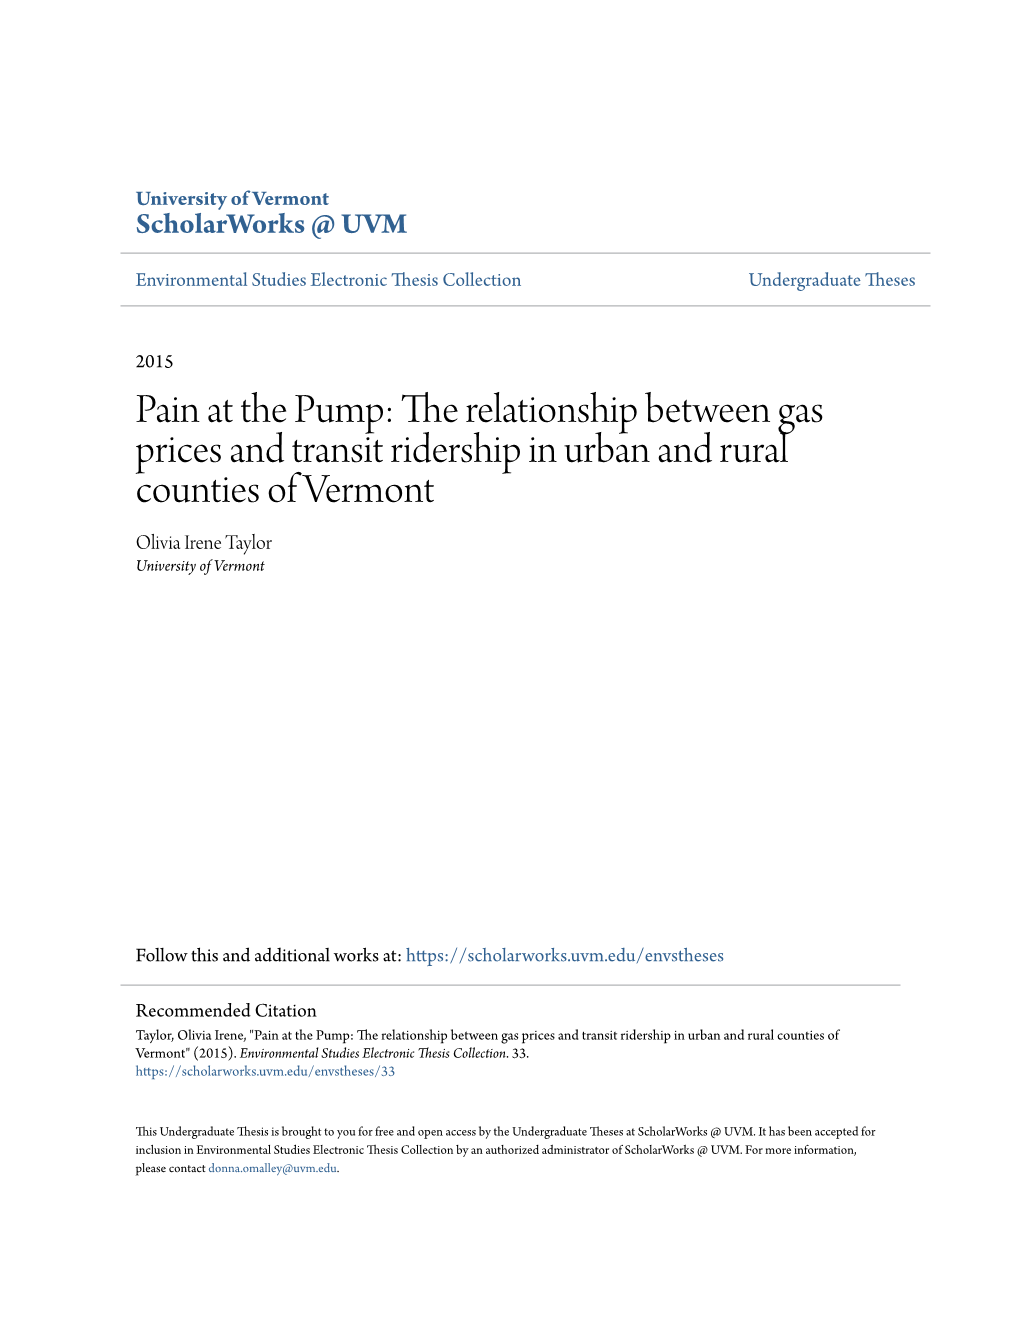 The Relationship Between Gas Prices and Transit Ridership in Urban and Rural Counties of Vermont